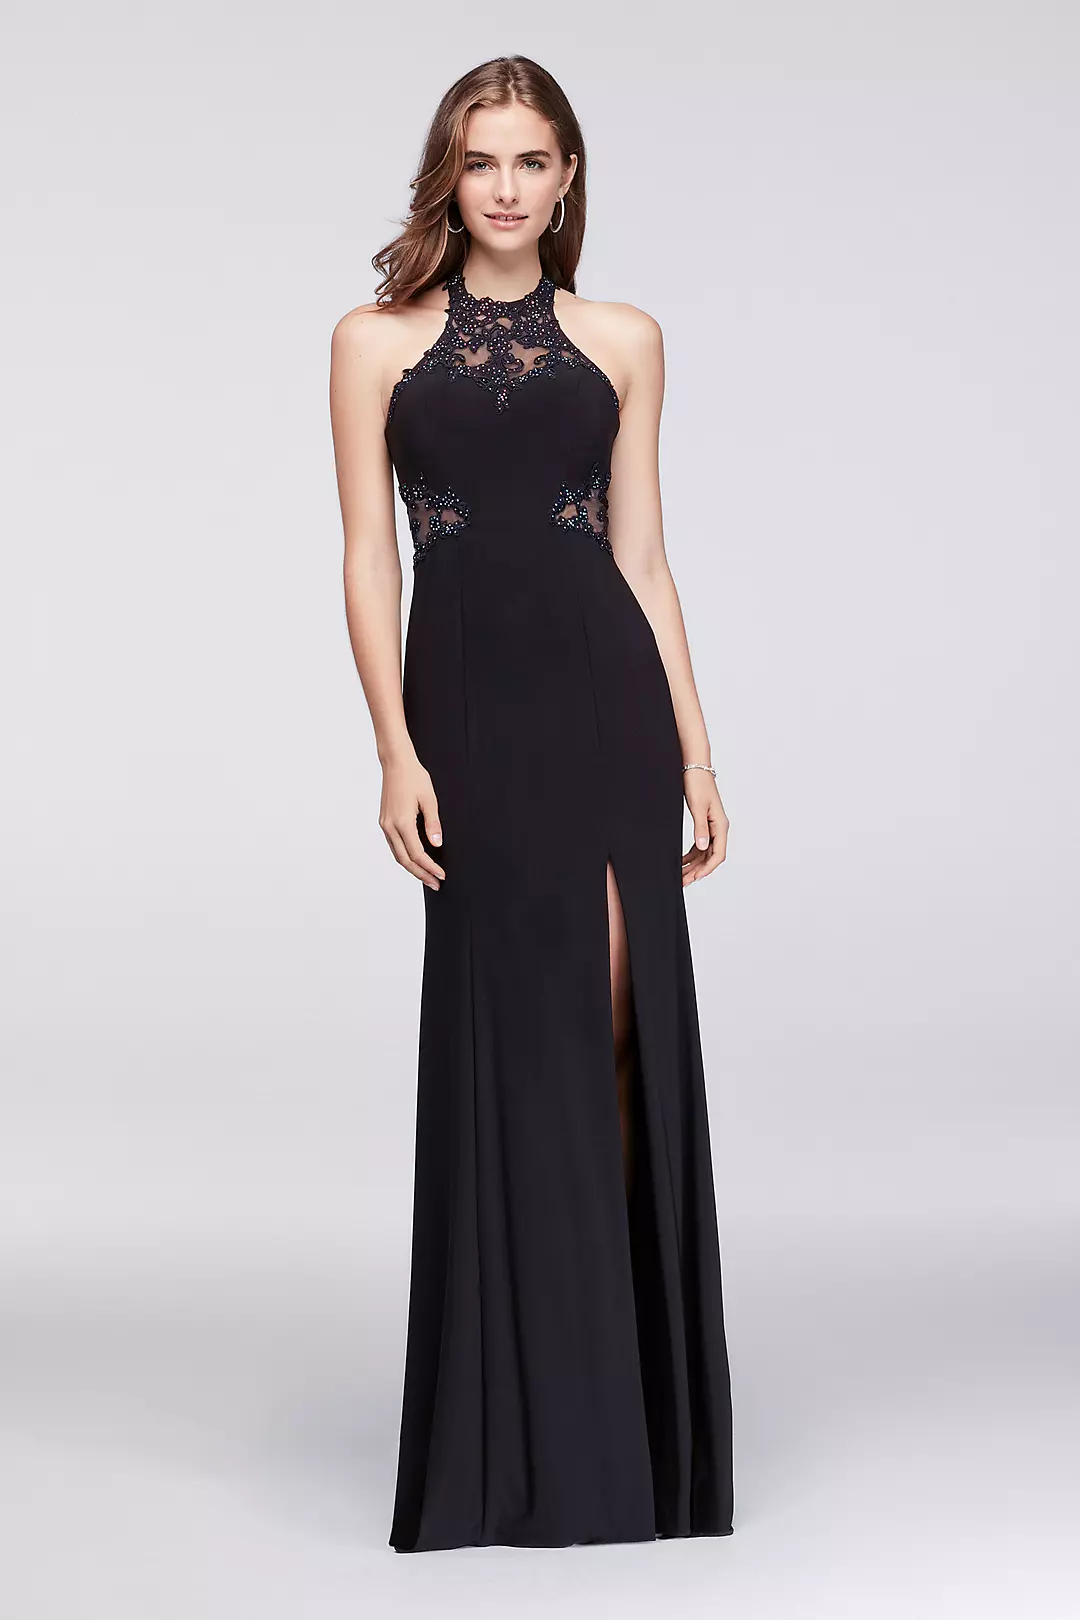 Illusion Lace and Stretch Jersey Halter Dress Image